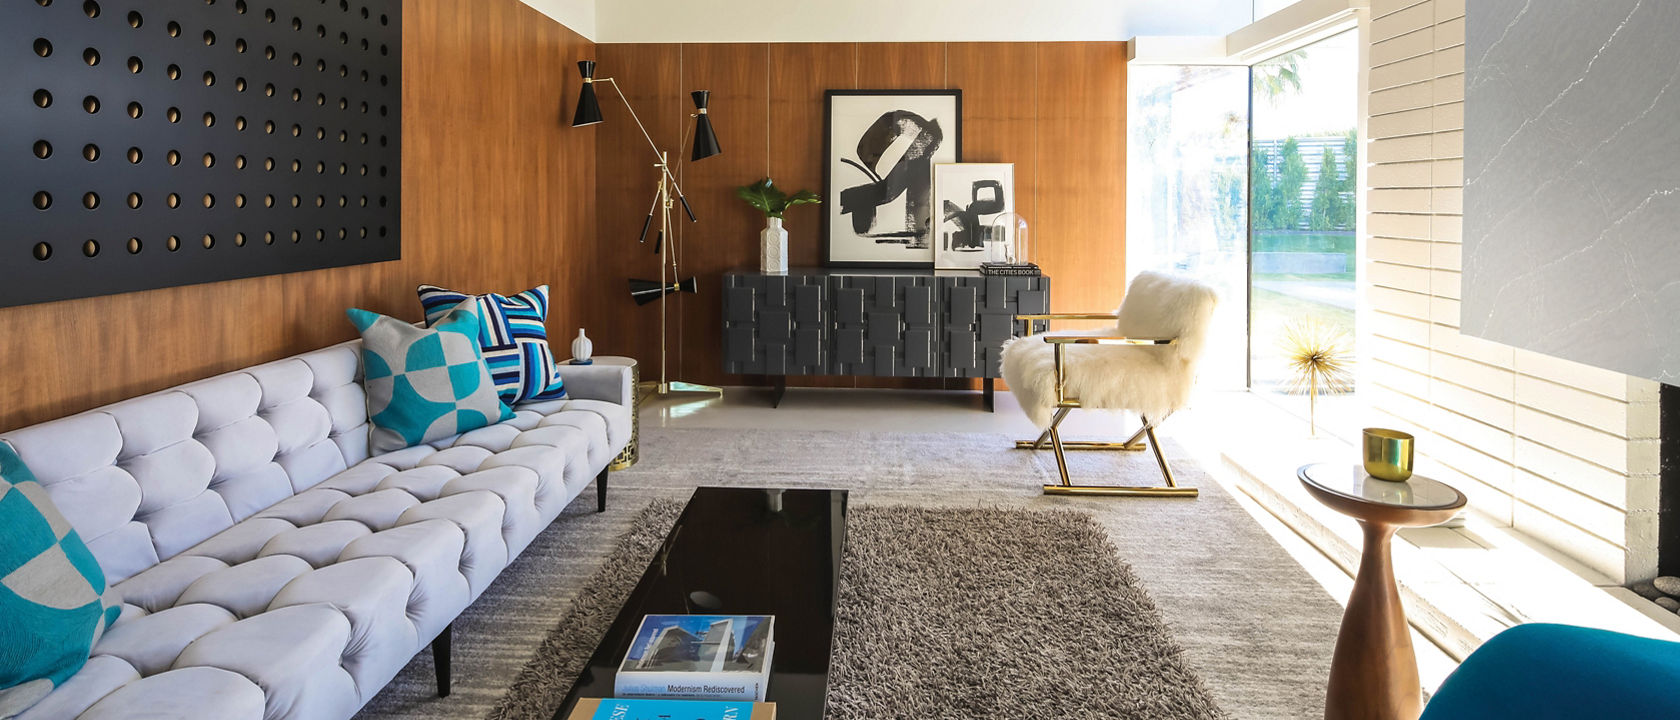 A mid-century modern living room with a white couch, shag carpet rug, wood paneling, and a gray quartz fireplace.